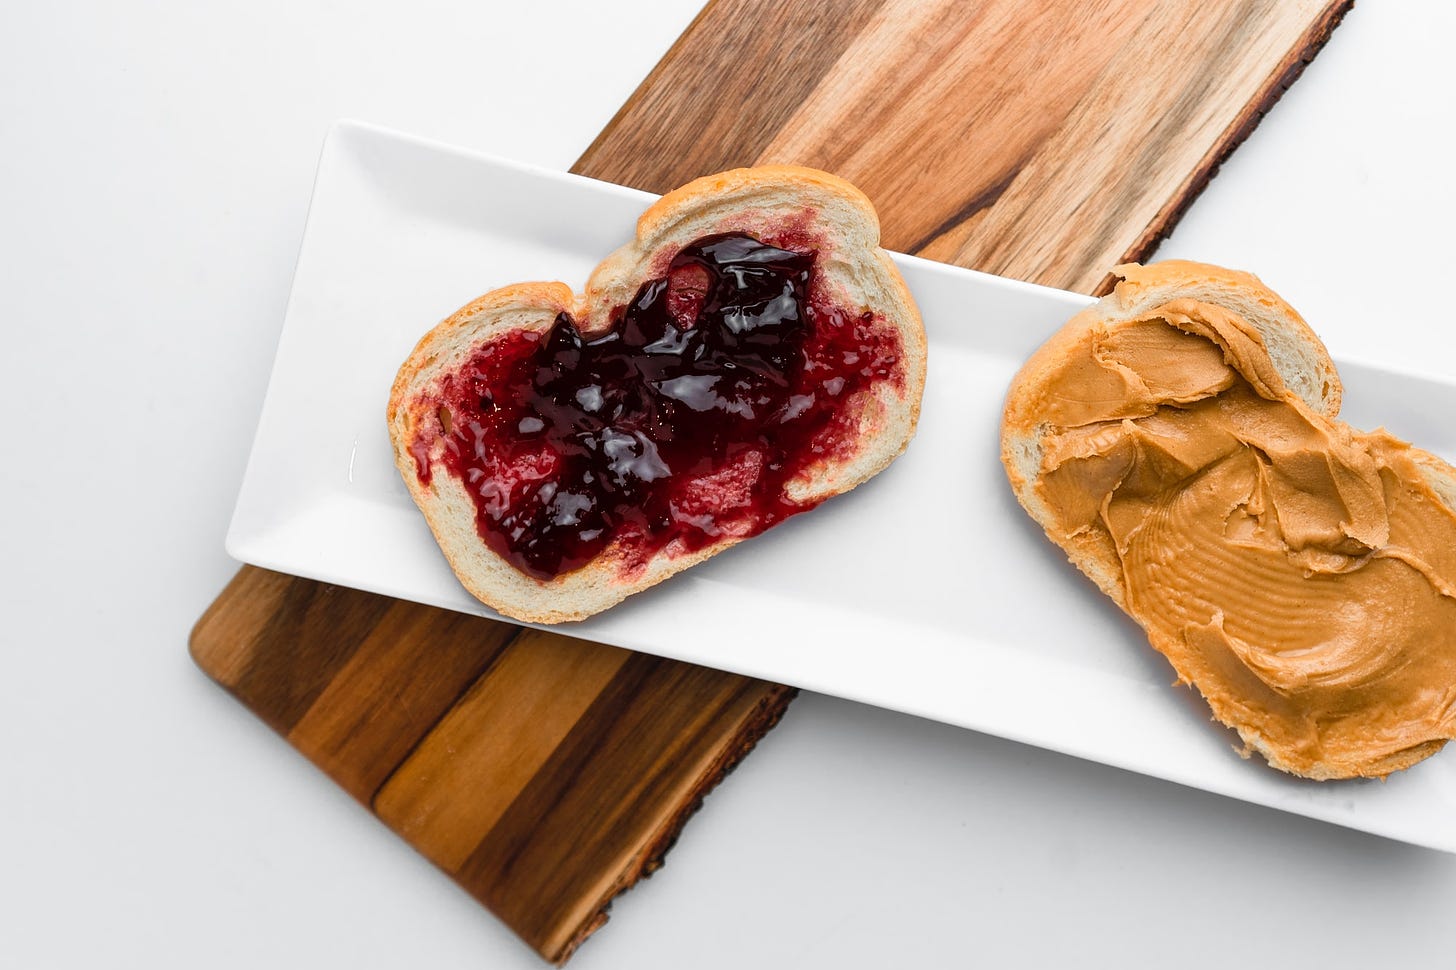 Is J.M. Smucker management overestimating its brand power?